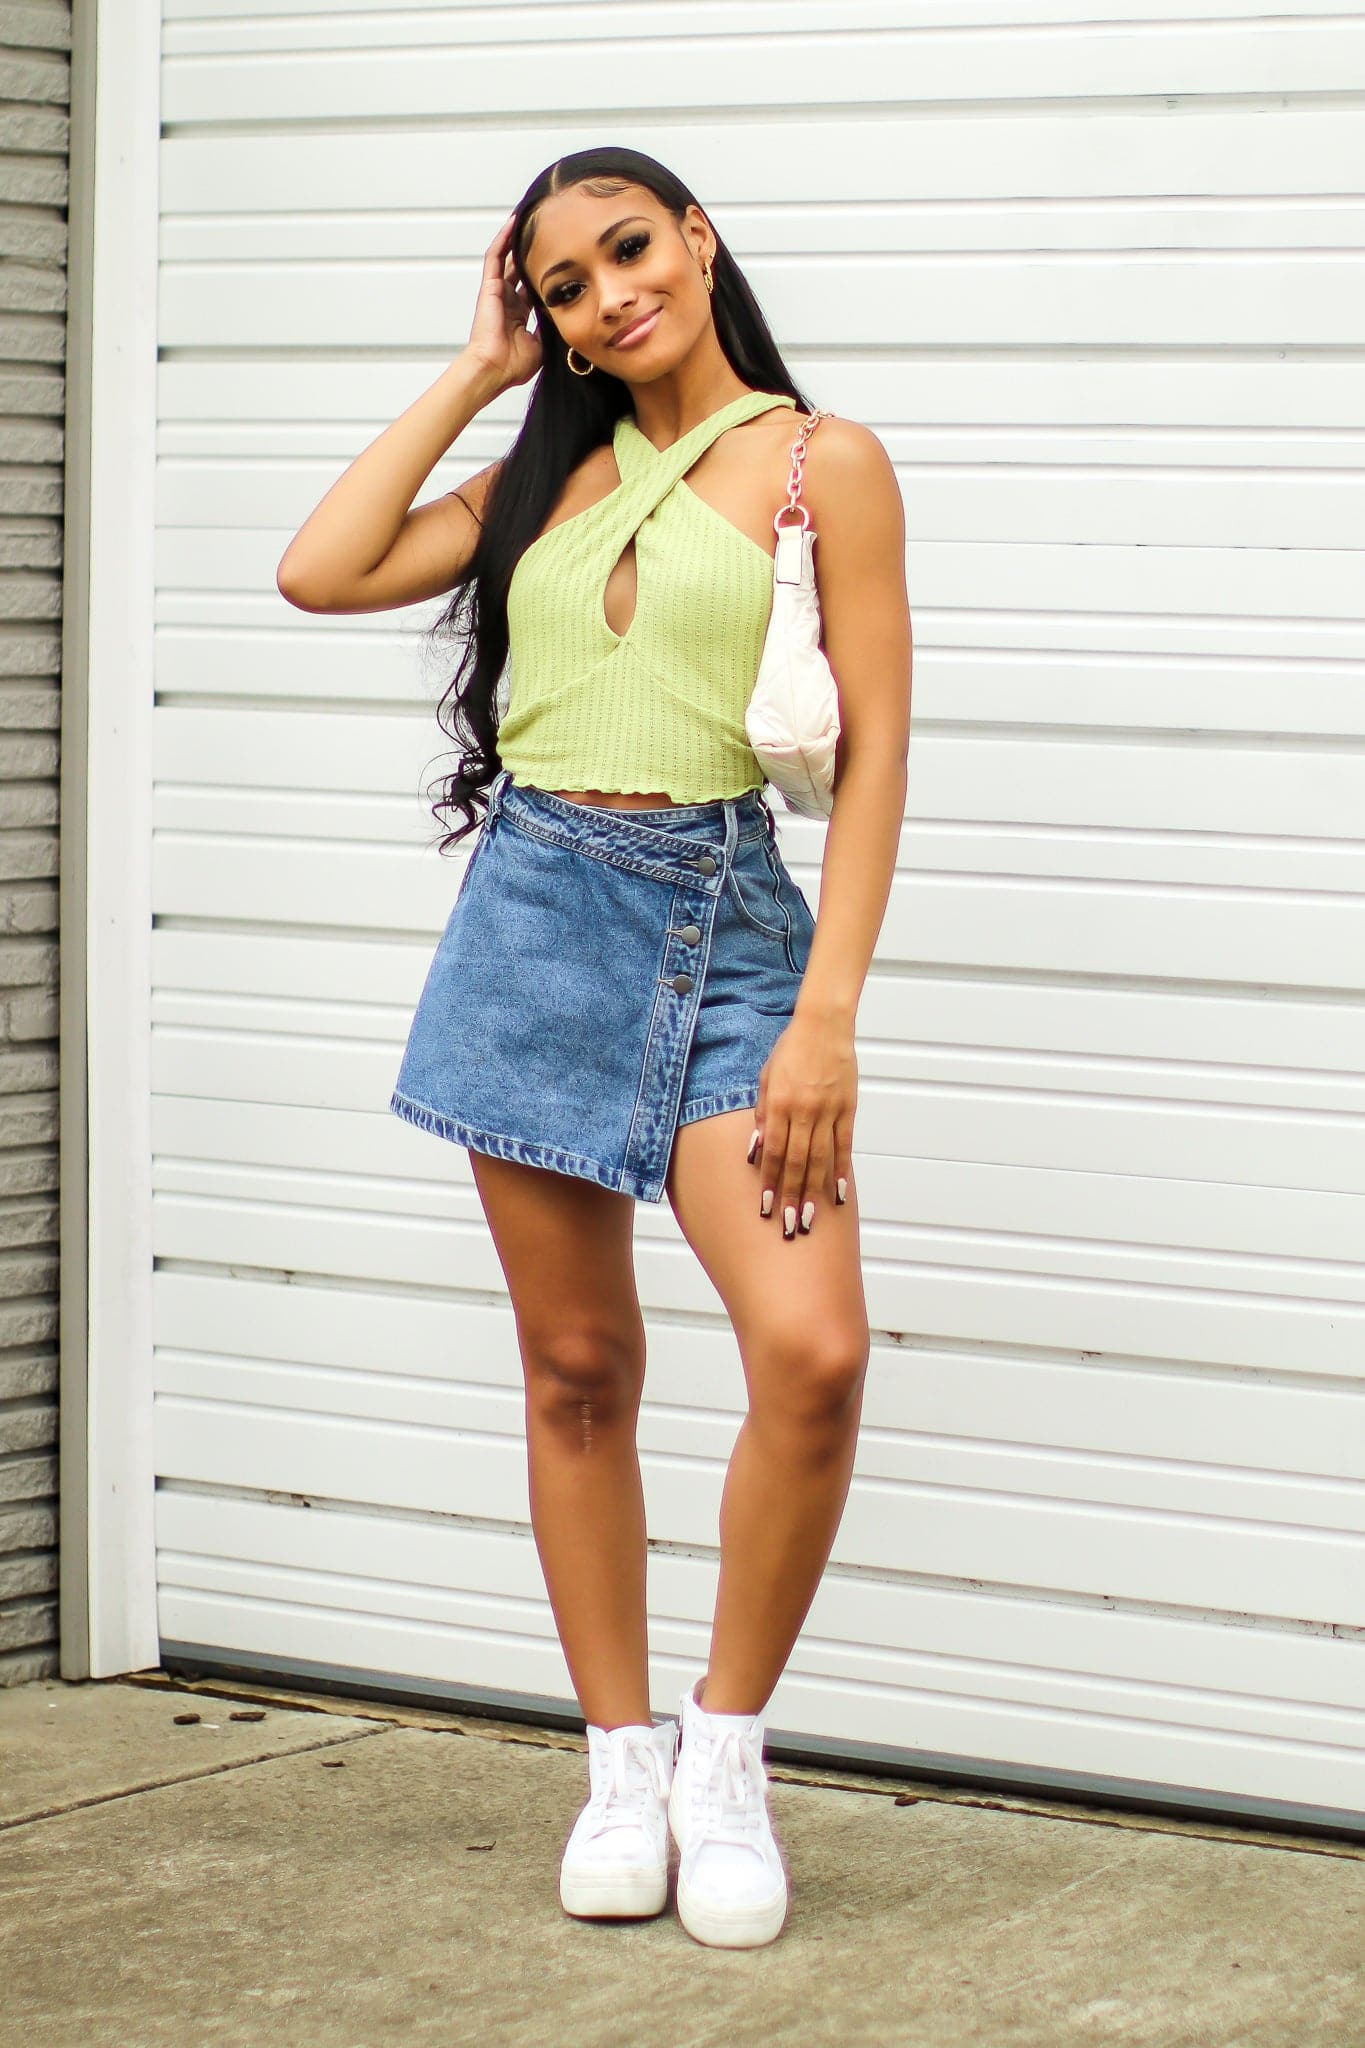  Navella Criss Cross Crop Top - FINAL SALE - Madison and Mallory